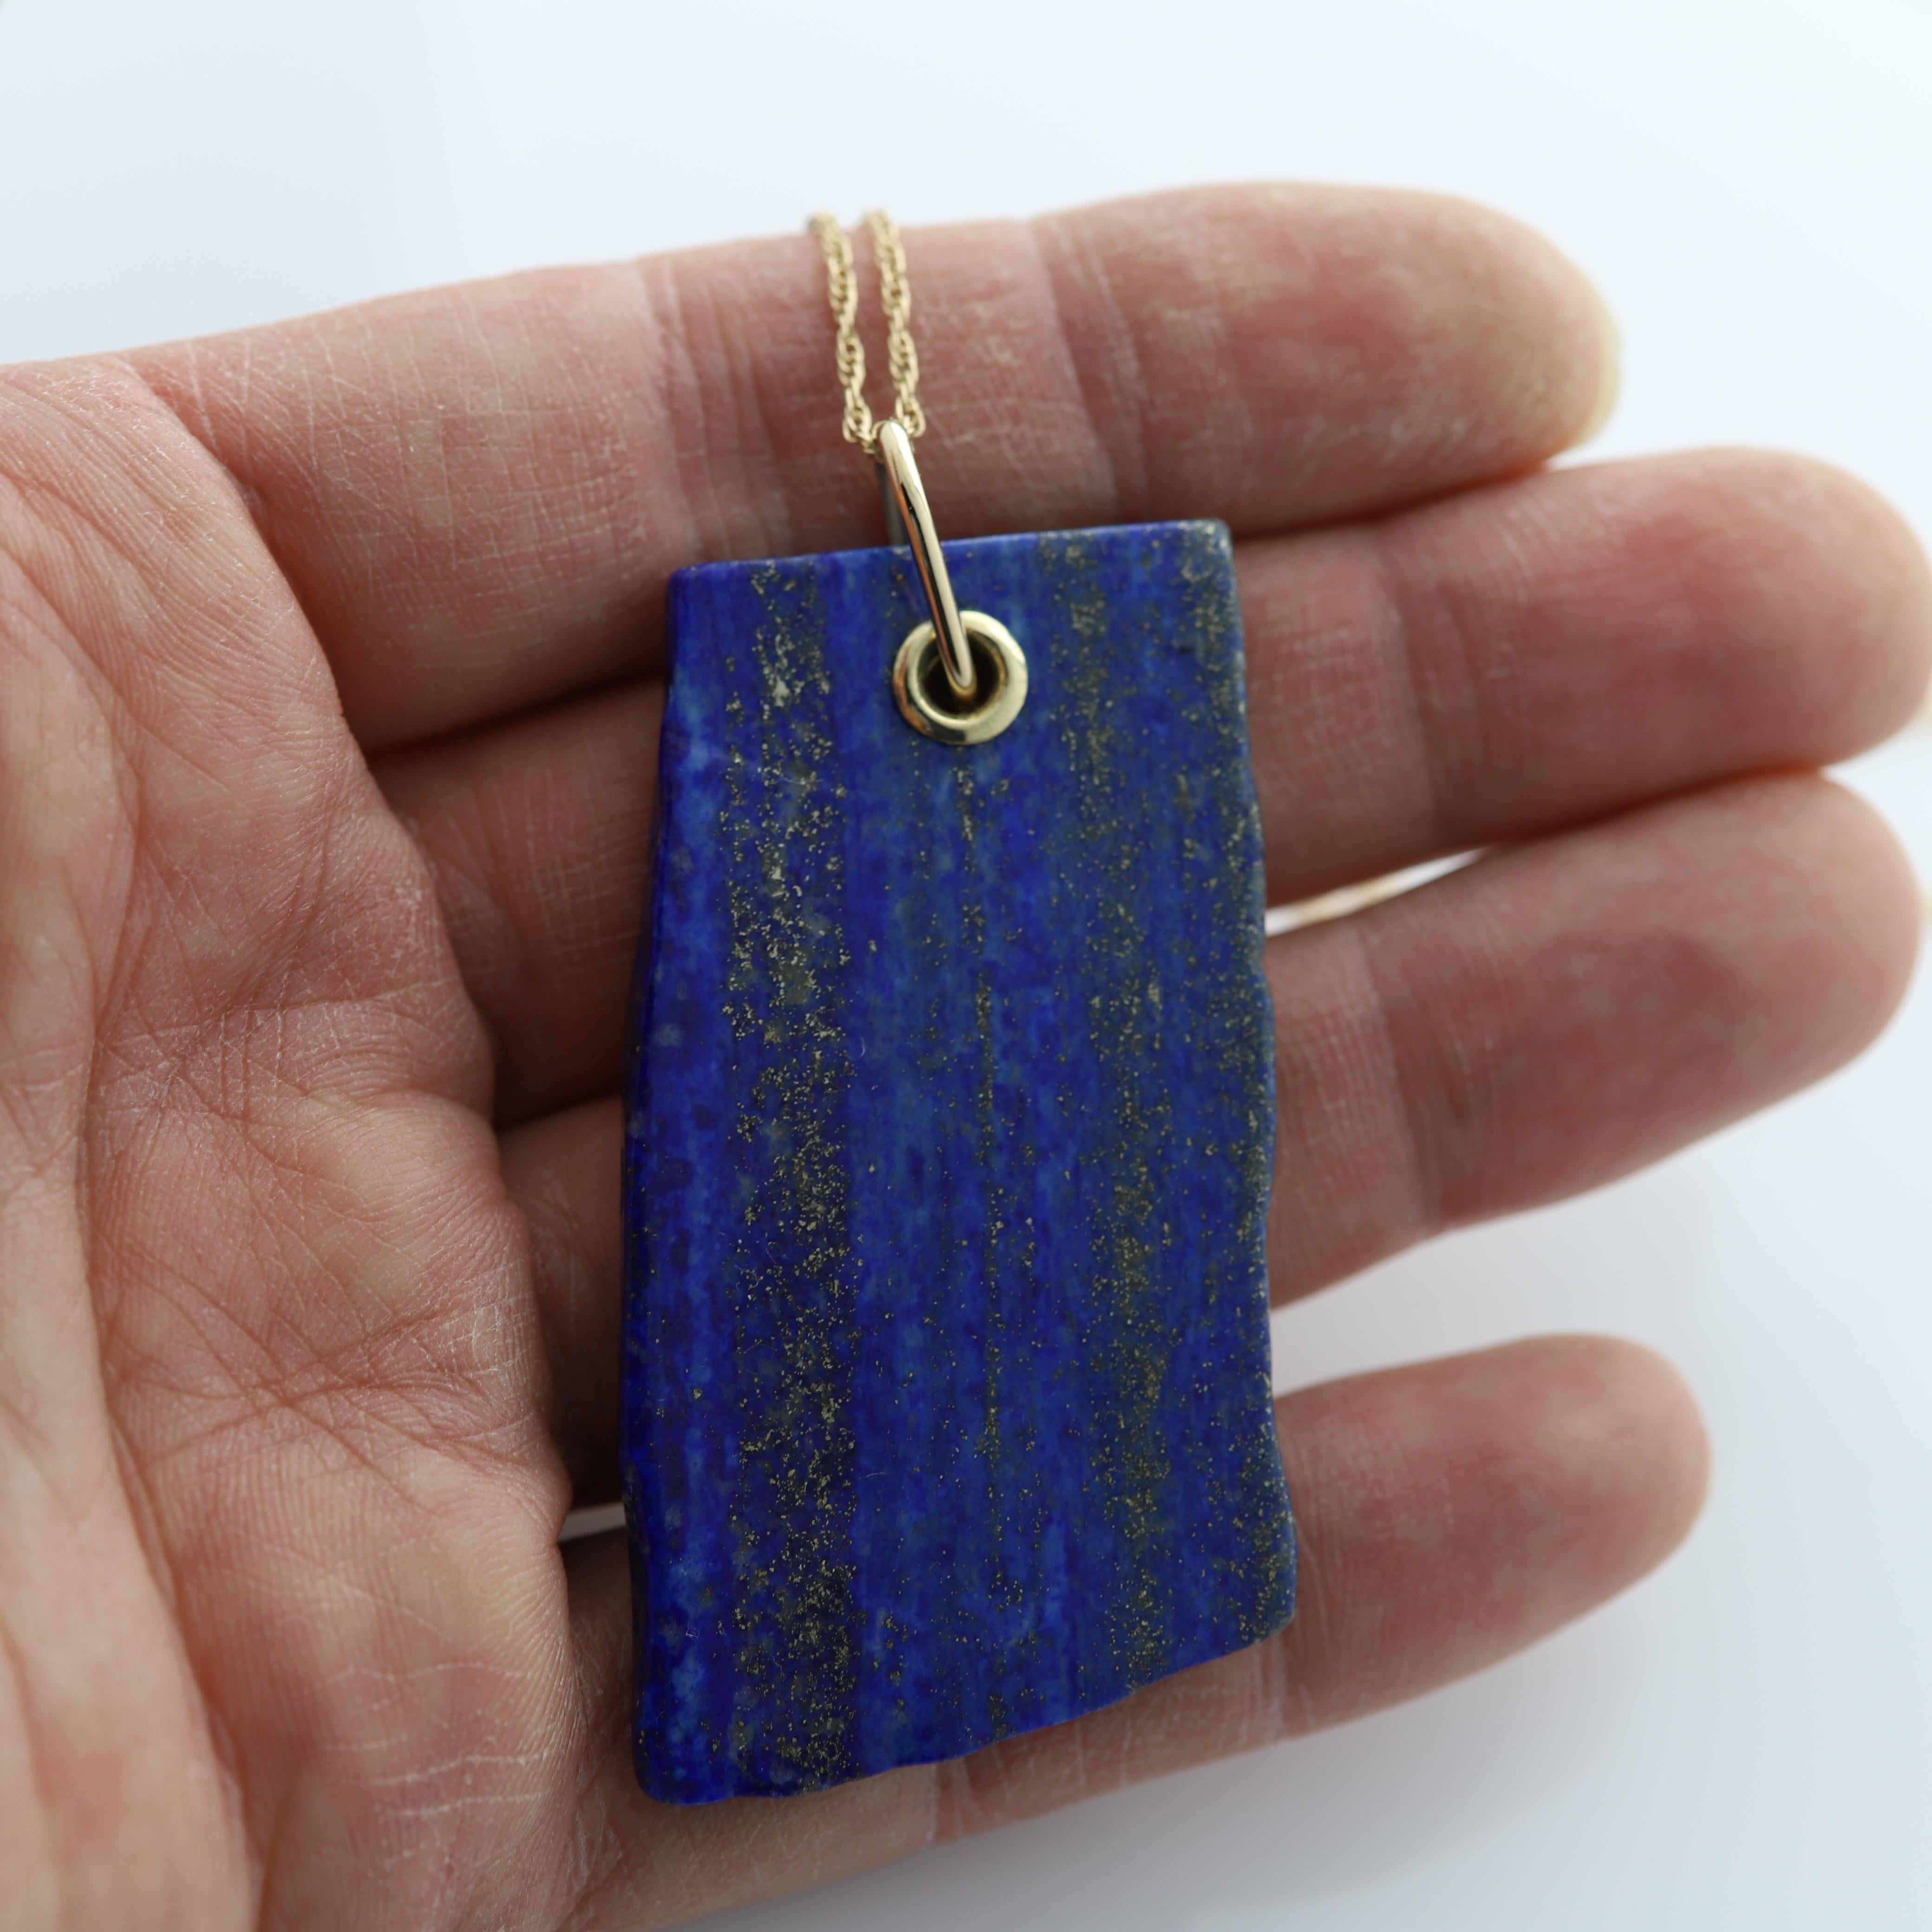 Lapis Necklace
Unique Shape of Lapis Stone with nice texture set with 14k components and chain.
Approx size of stone 2.5' Inch Long.
14k Yellow Gold 
Chain 16' Inch
Lapis with Rich Blue Texture and Gold tone flakes.
Imperfections due exist due to